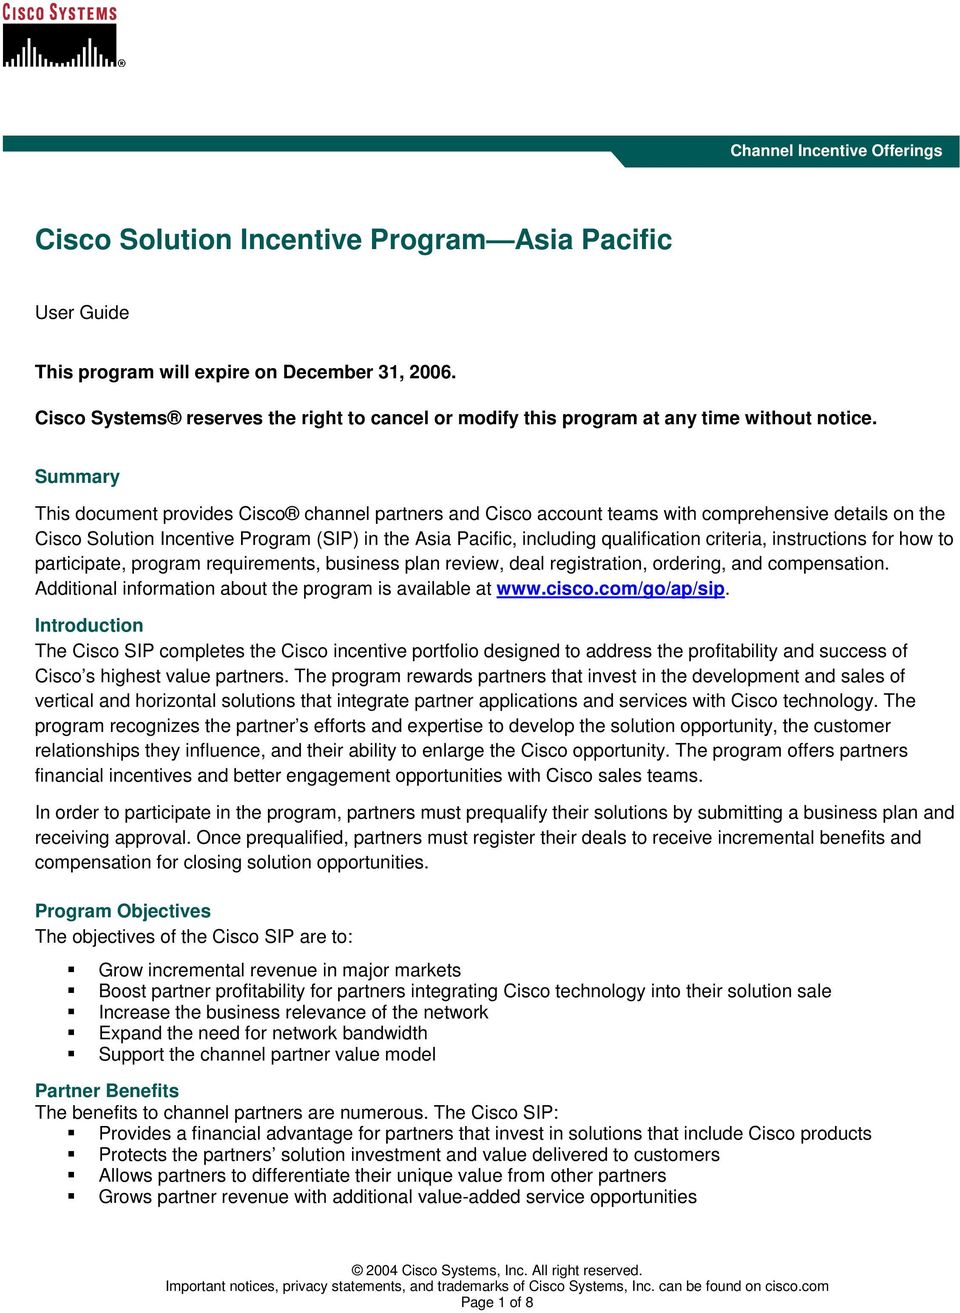 Summary This document provides Cisco channel partners and Cisco account teams with comprehensive details on the Cisco Solution Incentive Program (SIP) in the Asia Pacific, including qualification